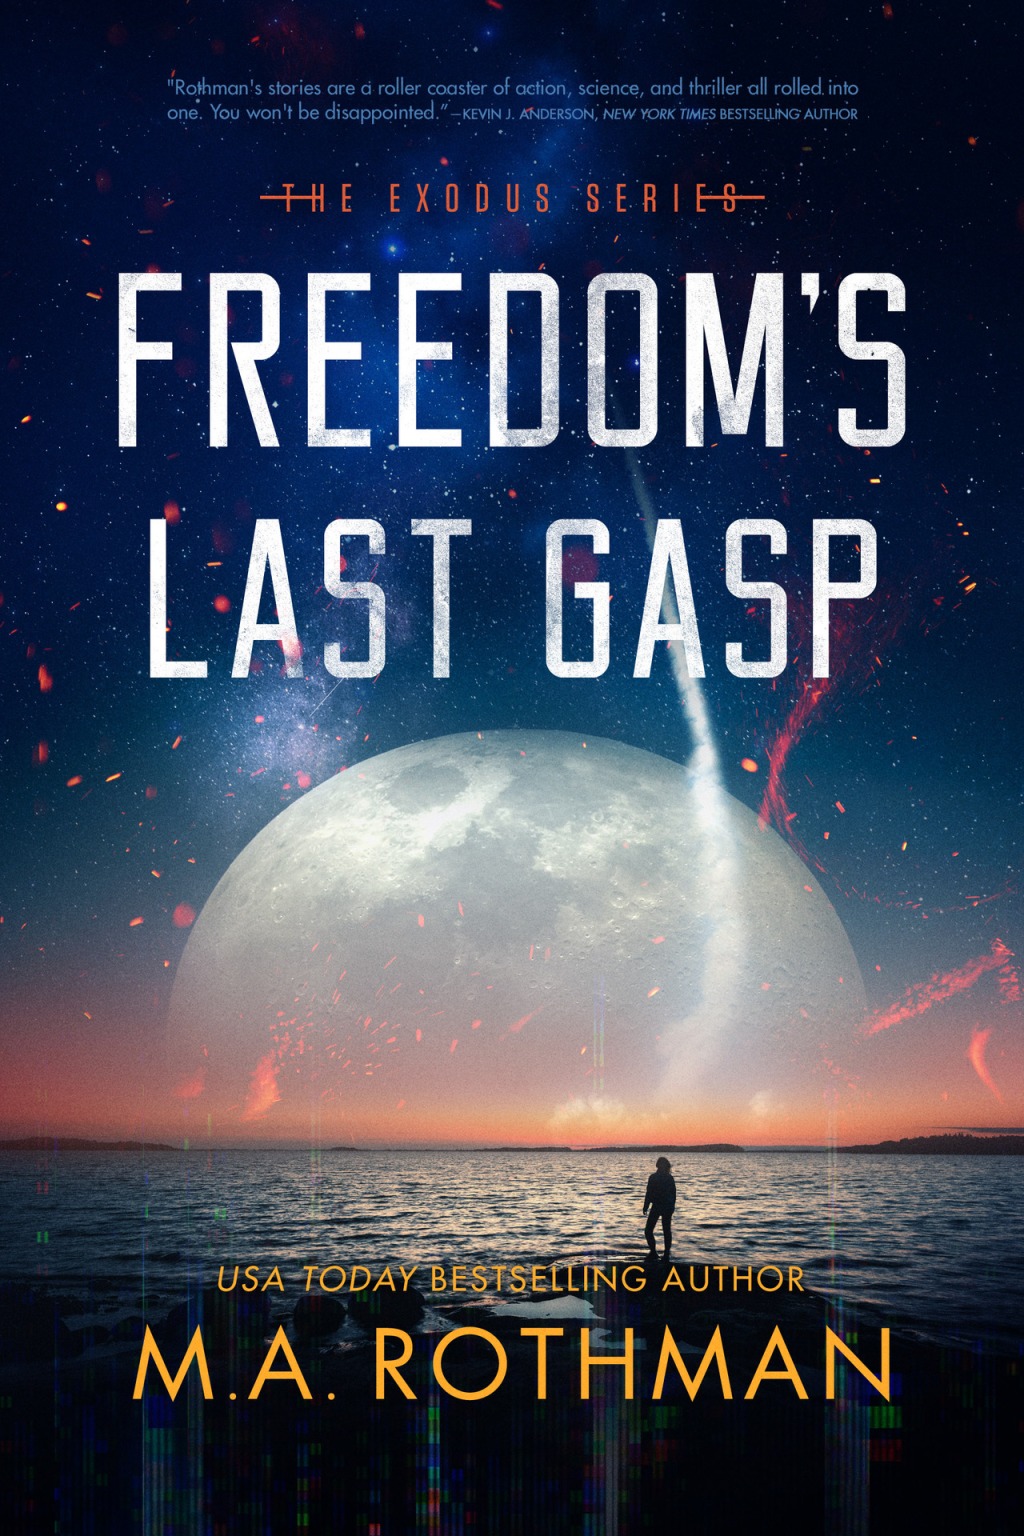 Freedom’s Last Gasp – That was quite a disappointment.